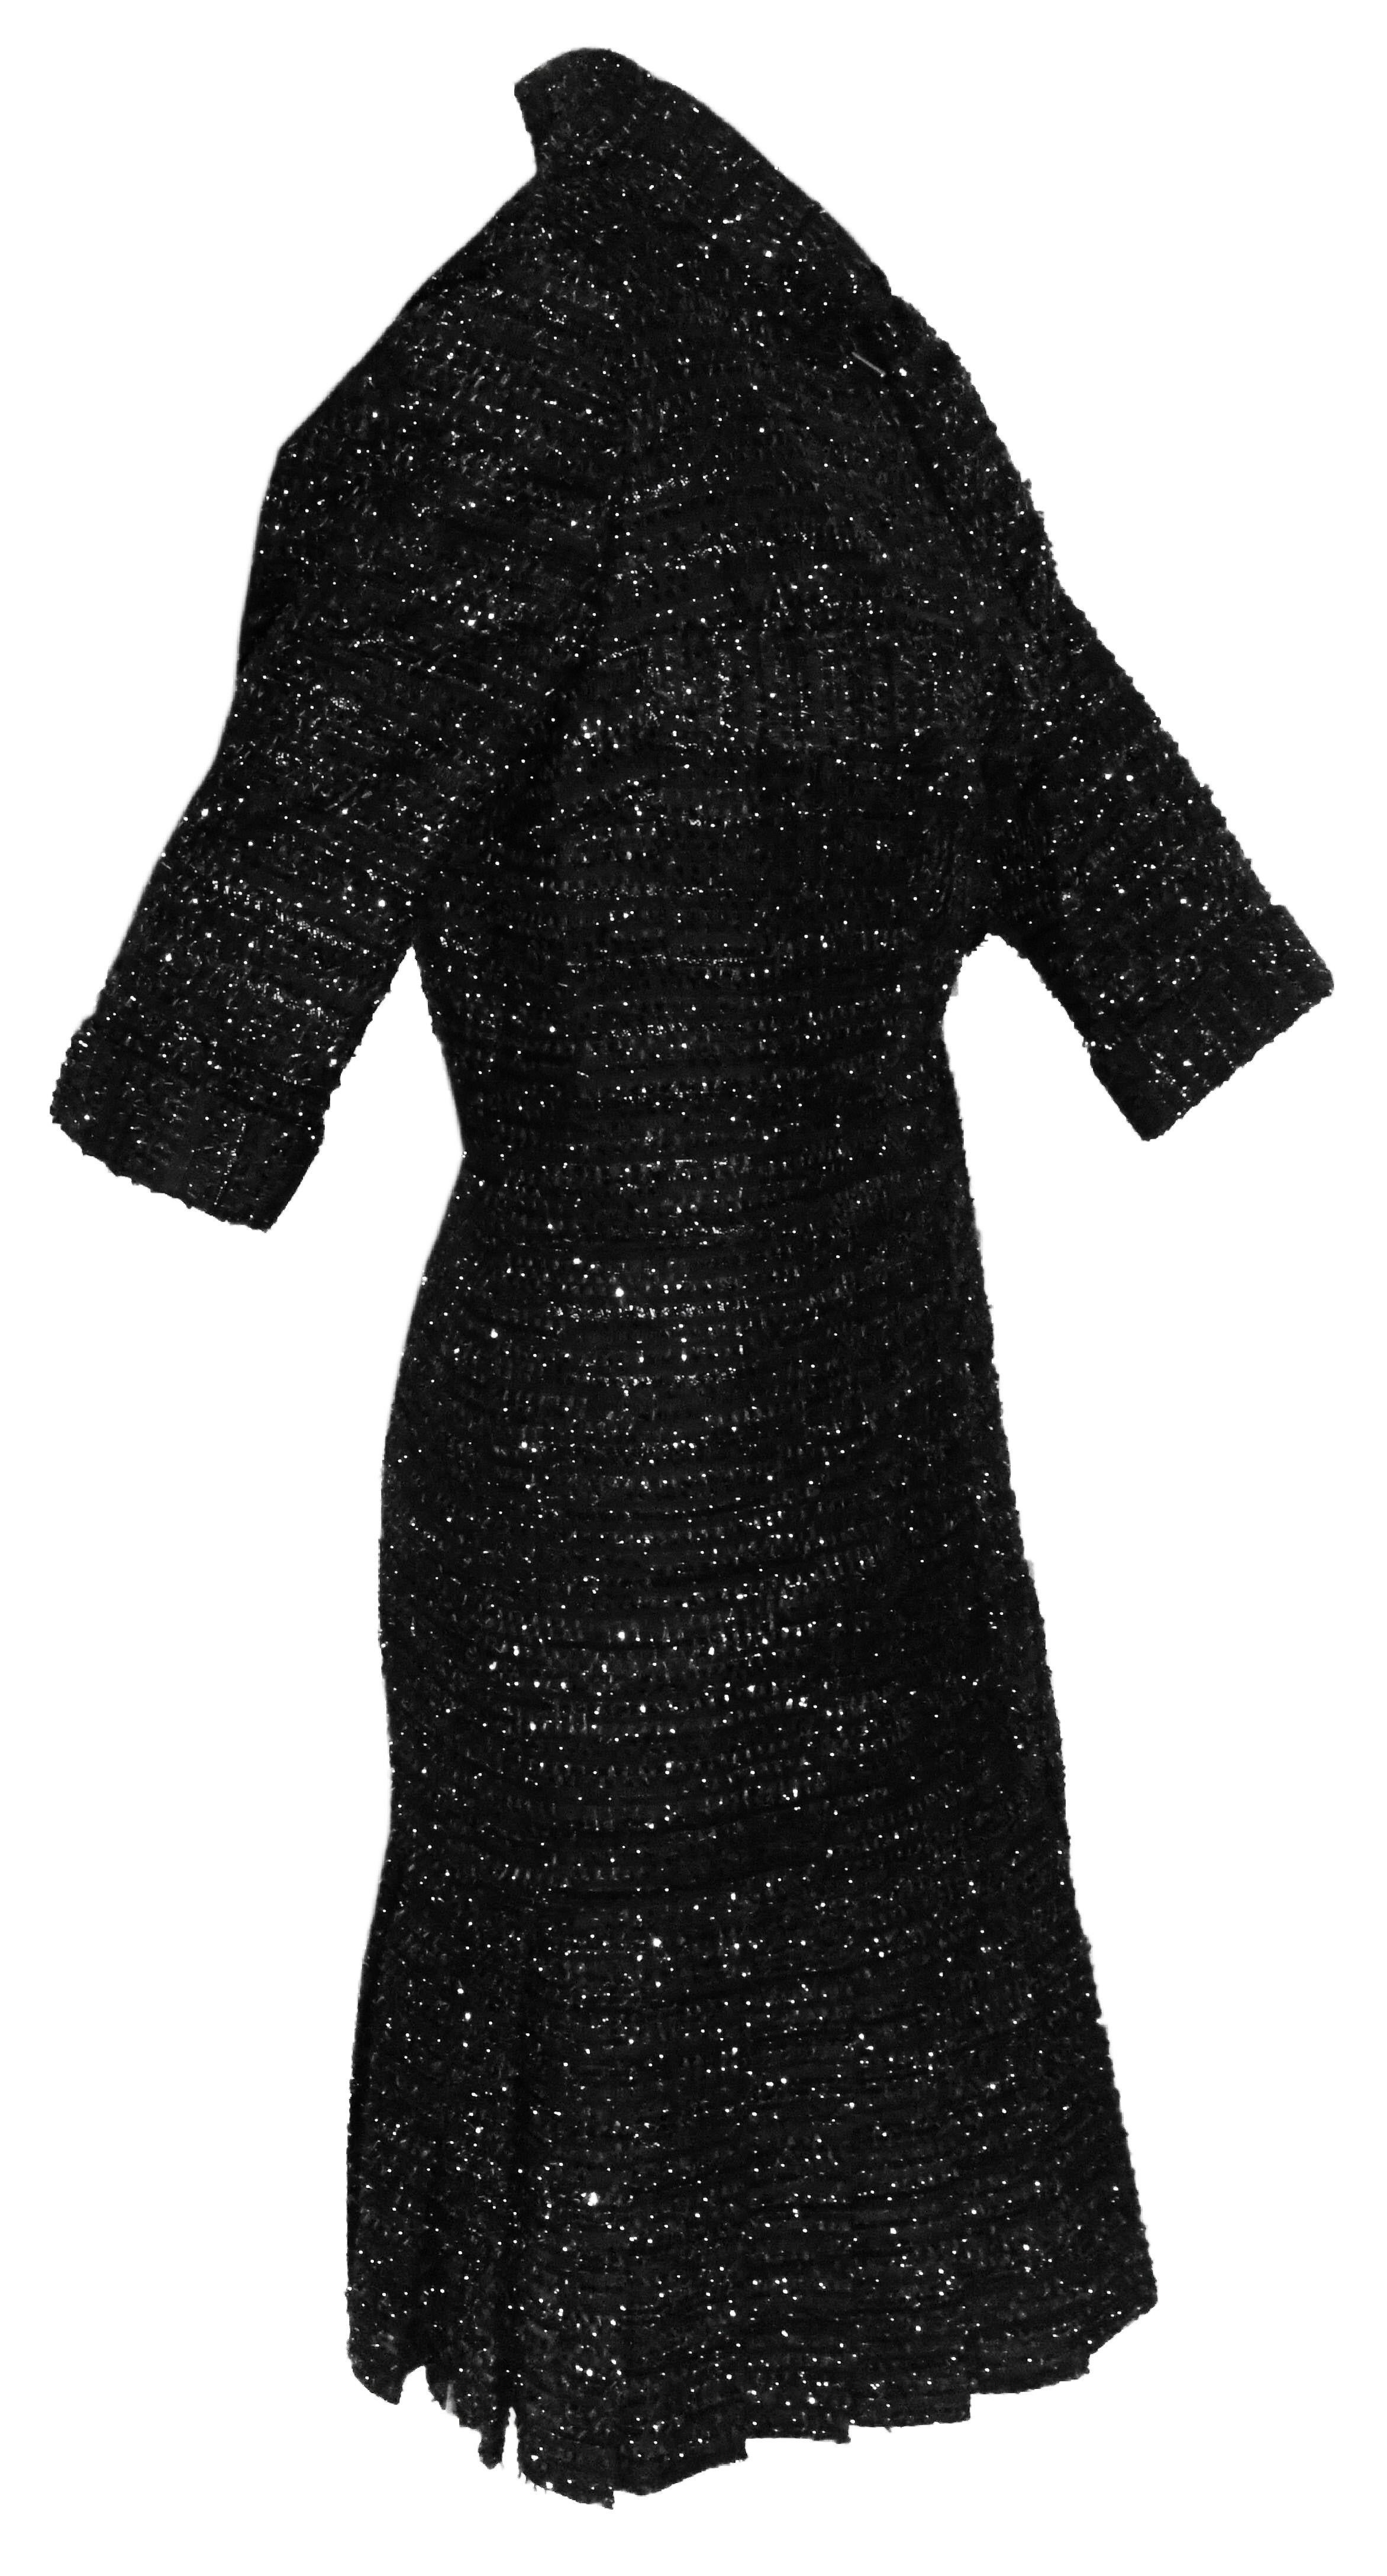 Women's Chanel Black  & Silver Lurex Thread Dress With 3/4 Sleeves Pleated at Hem For Sale